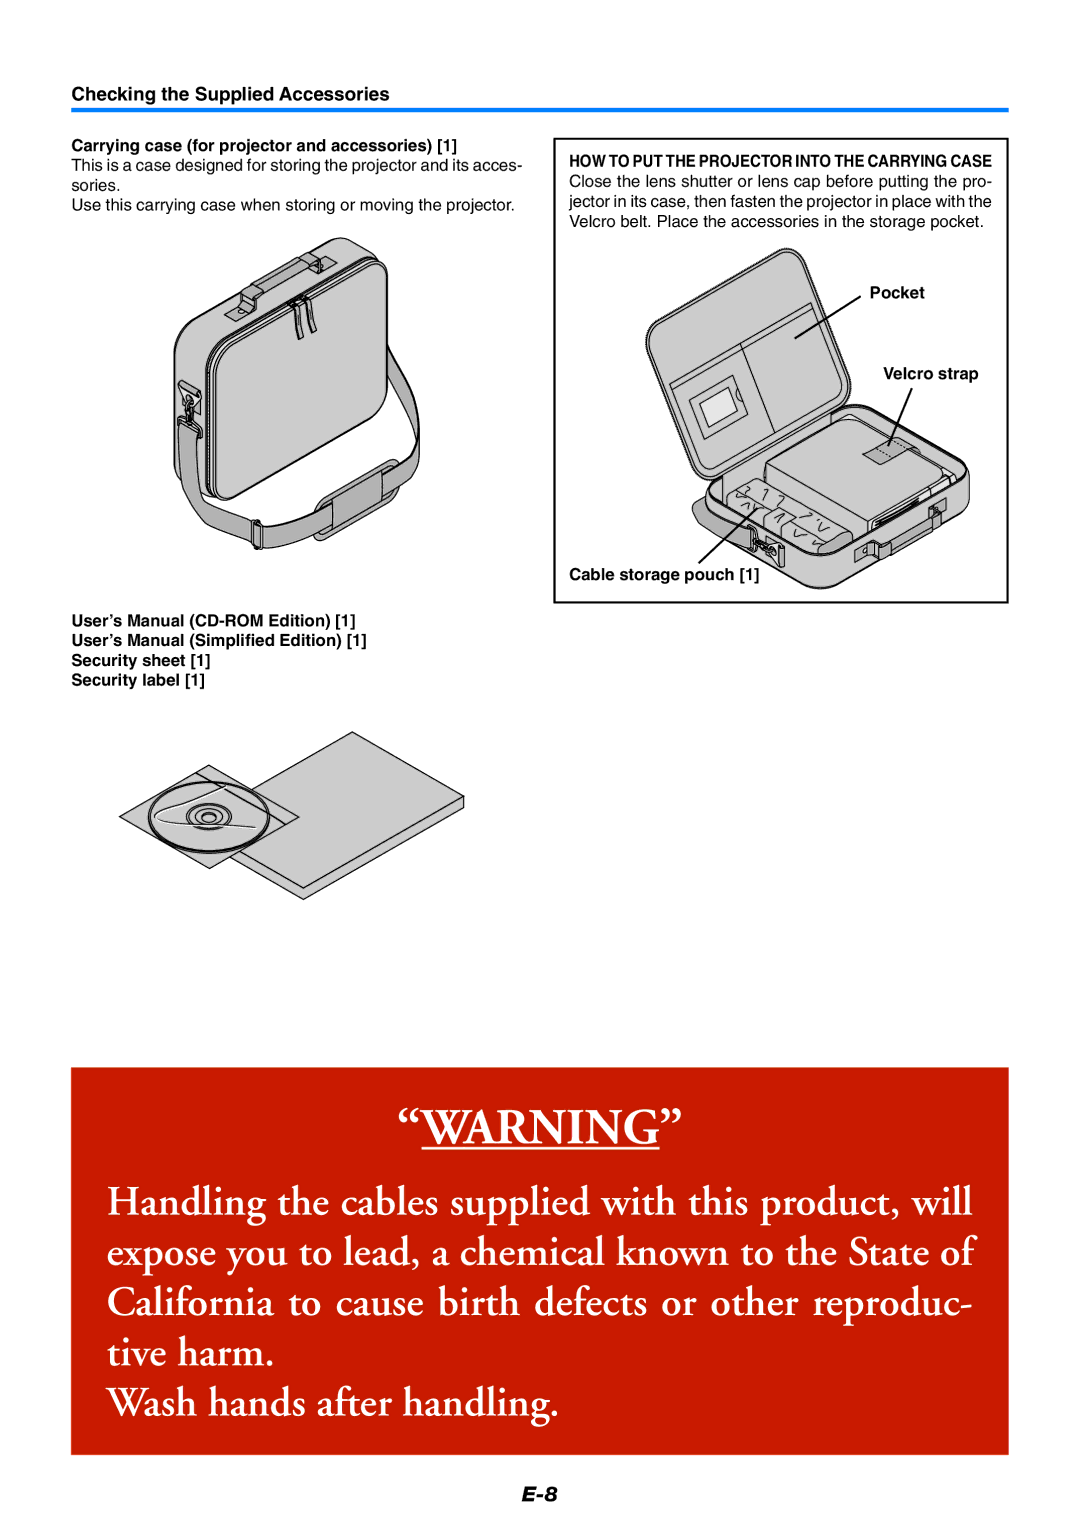 PLUS Vision U4-237 user manual Checking the Supplied Accessories, Carrying case for projector and accessories 